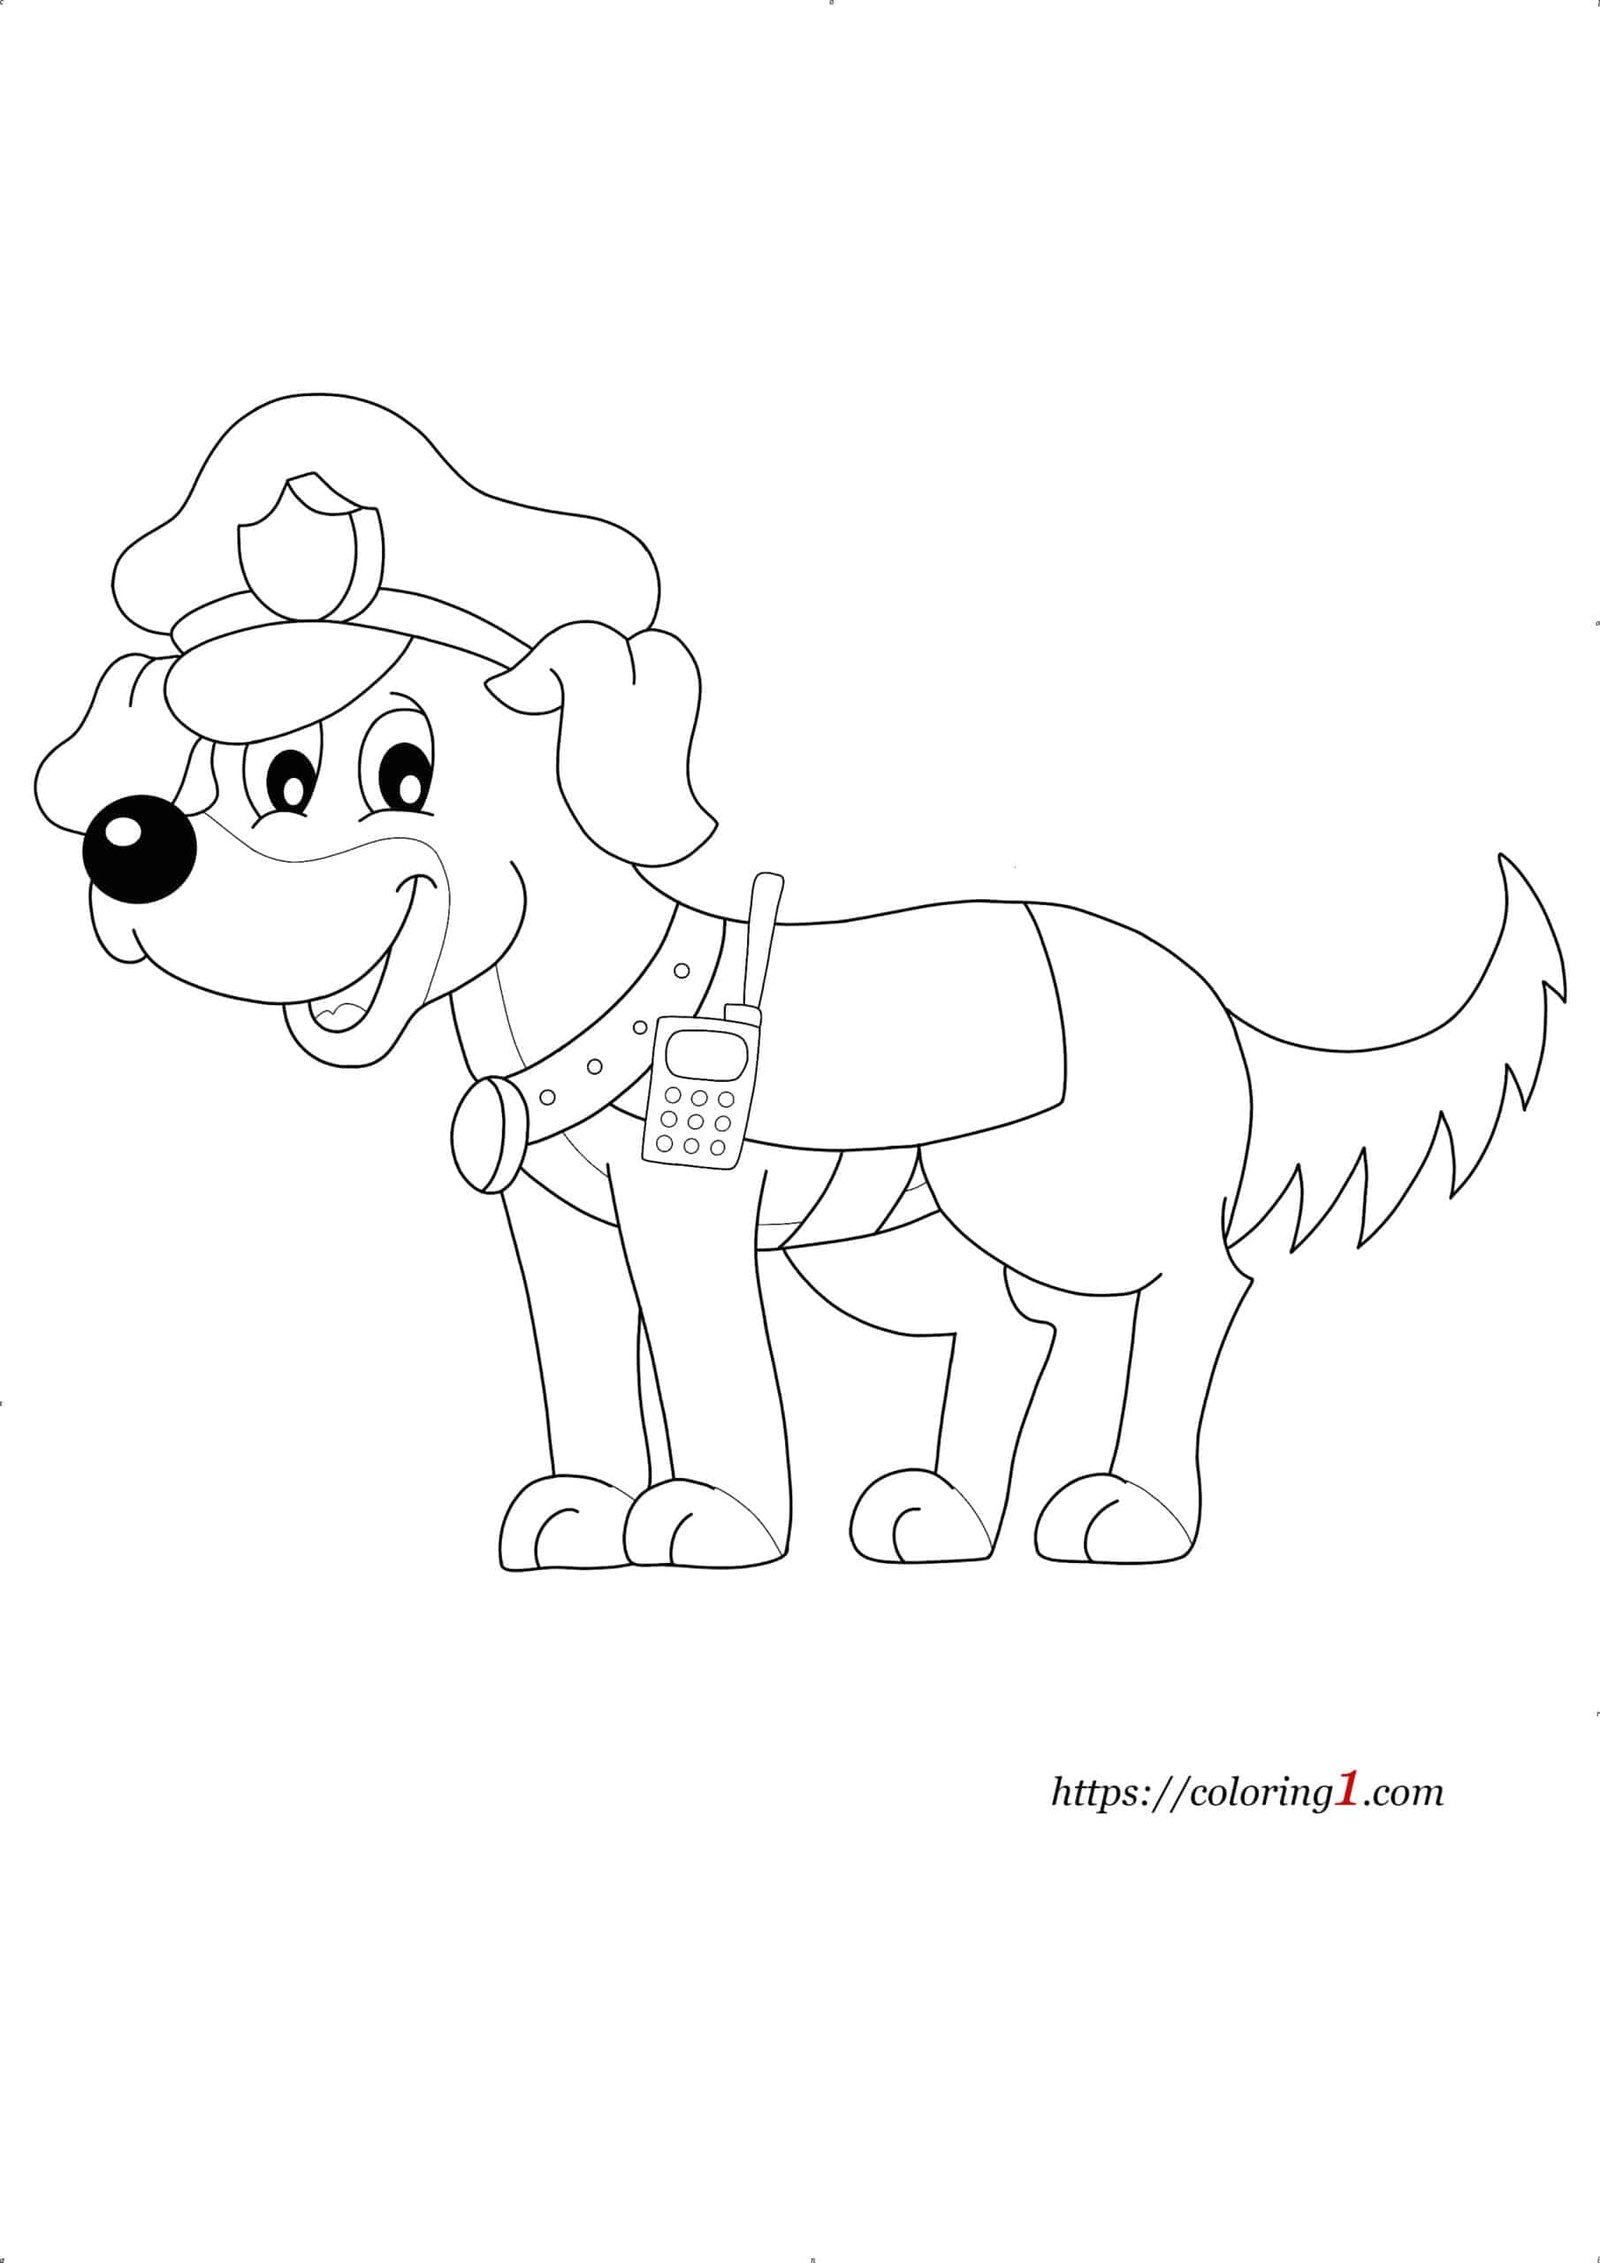 Police Dog coloring page